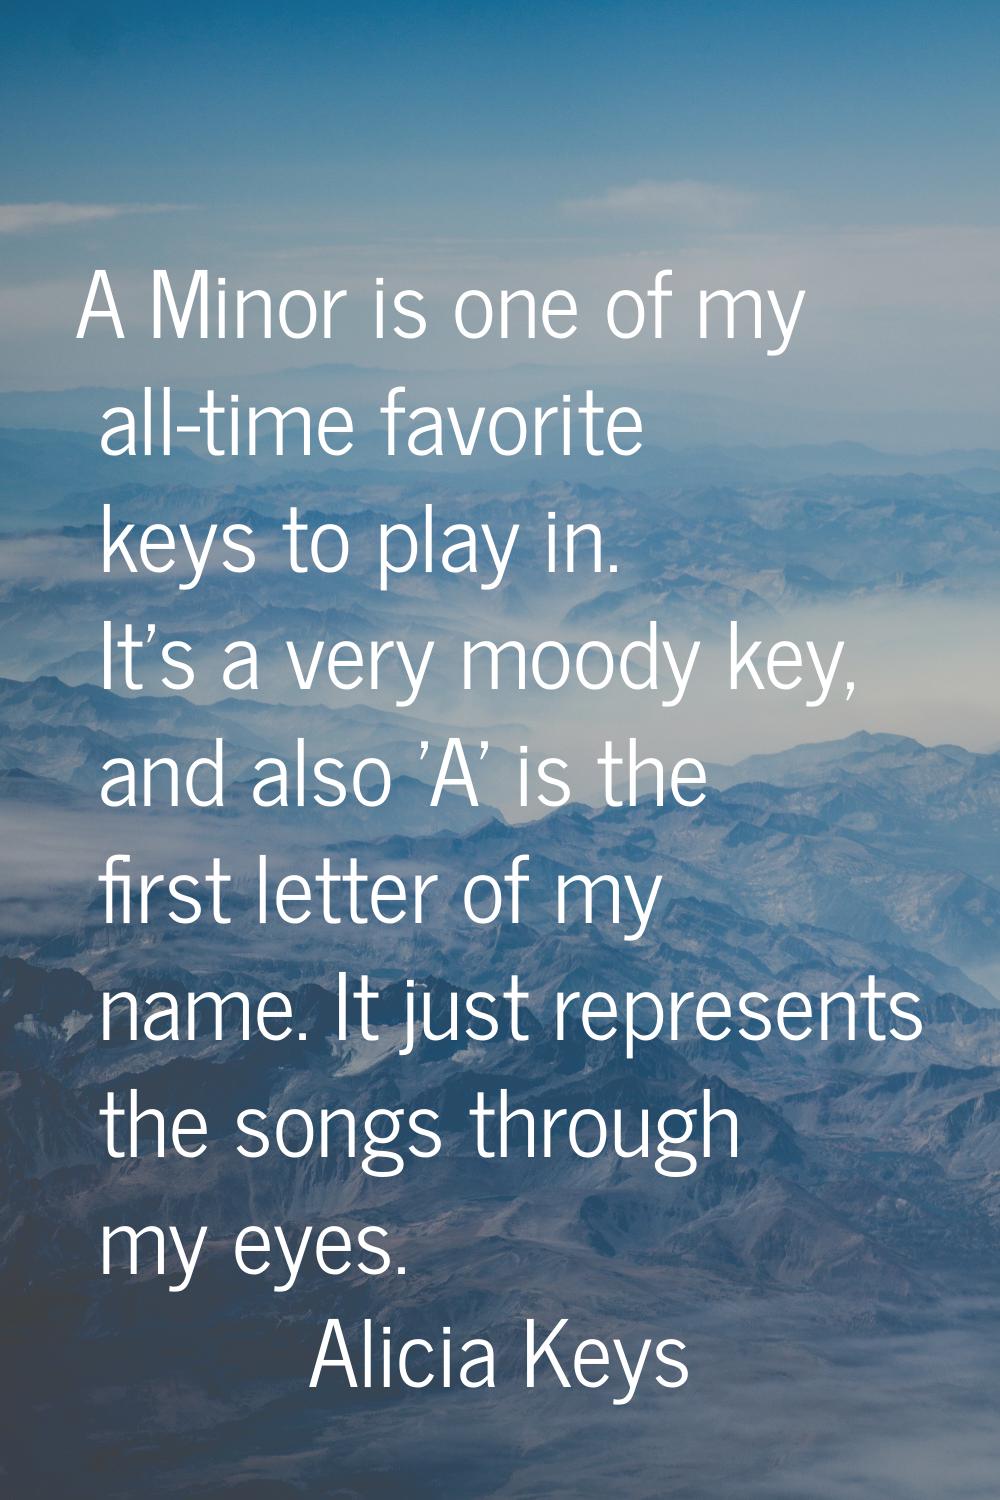 A Minor is one of my all-time favorite keys to play in. It's a very moody key, and also 'A' is the 